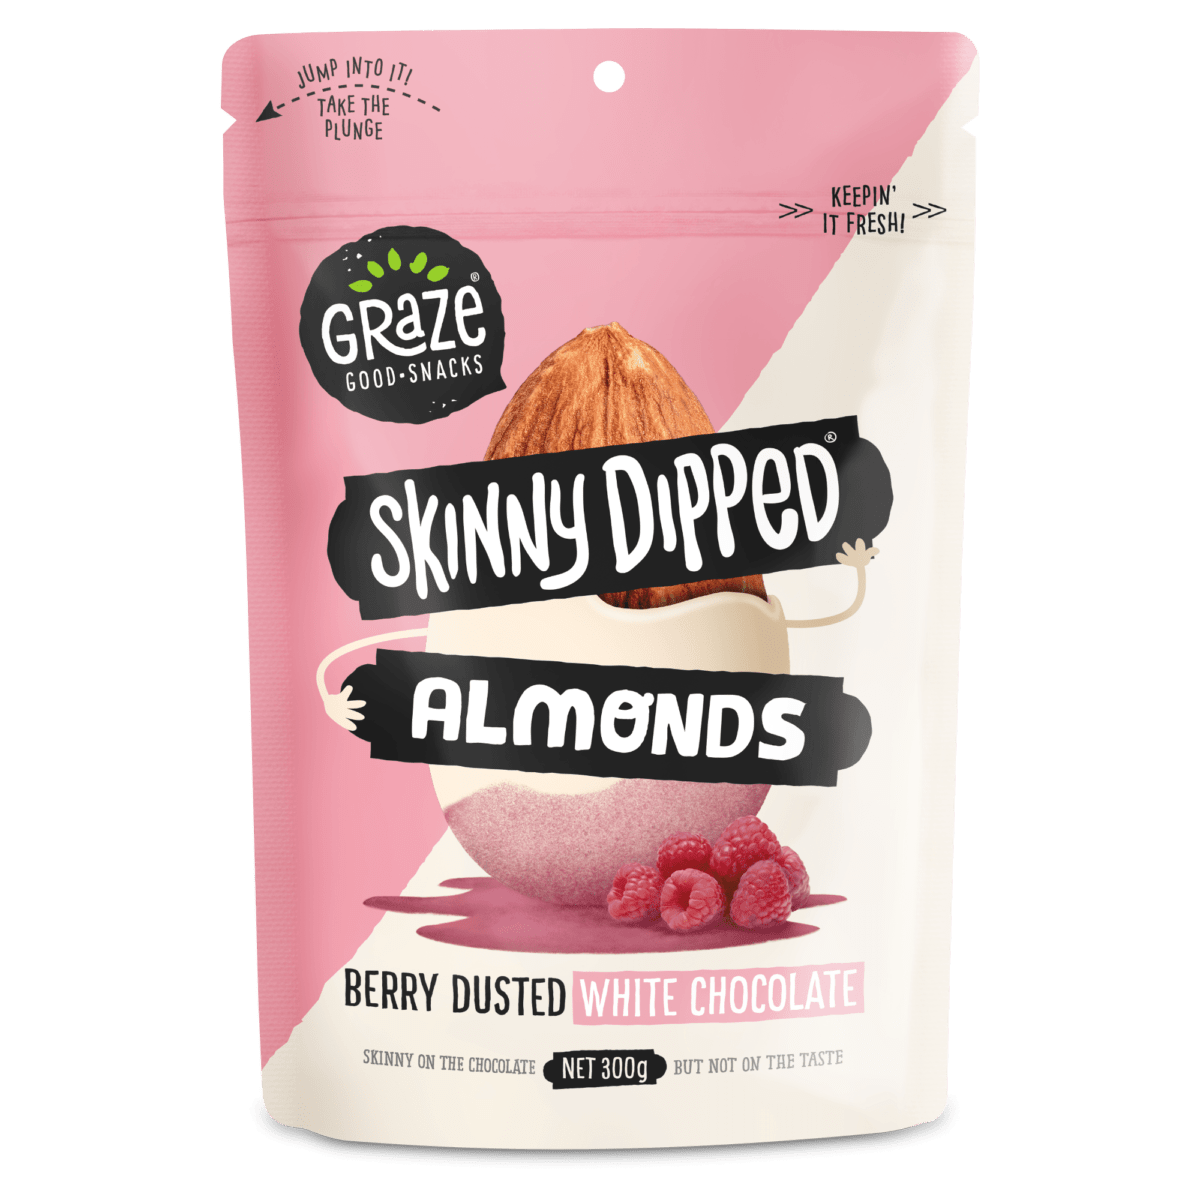 Graze Skinny Dipped Almonds berry dusted White Chocolate 300g